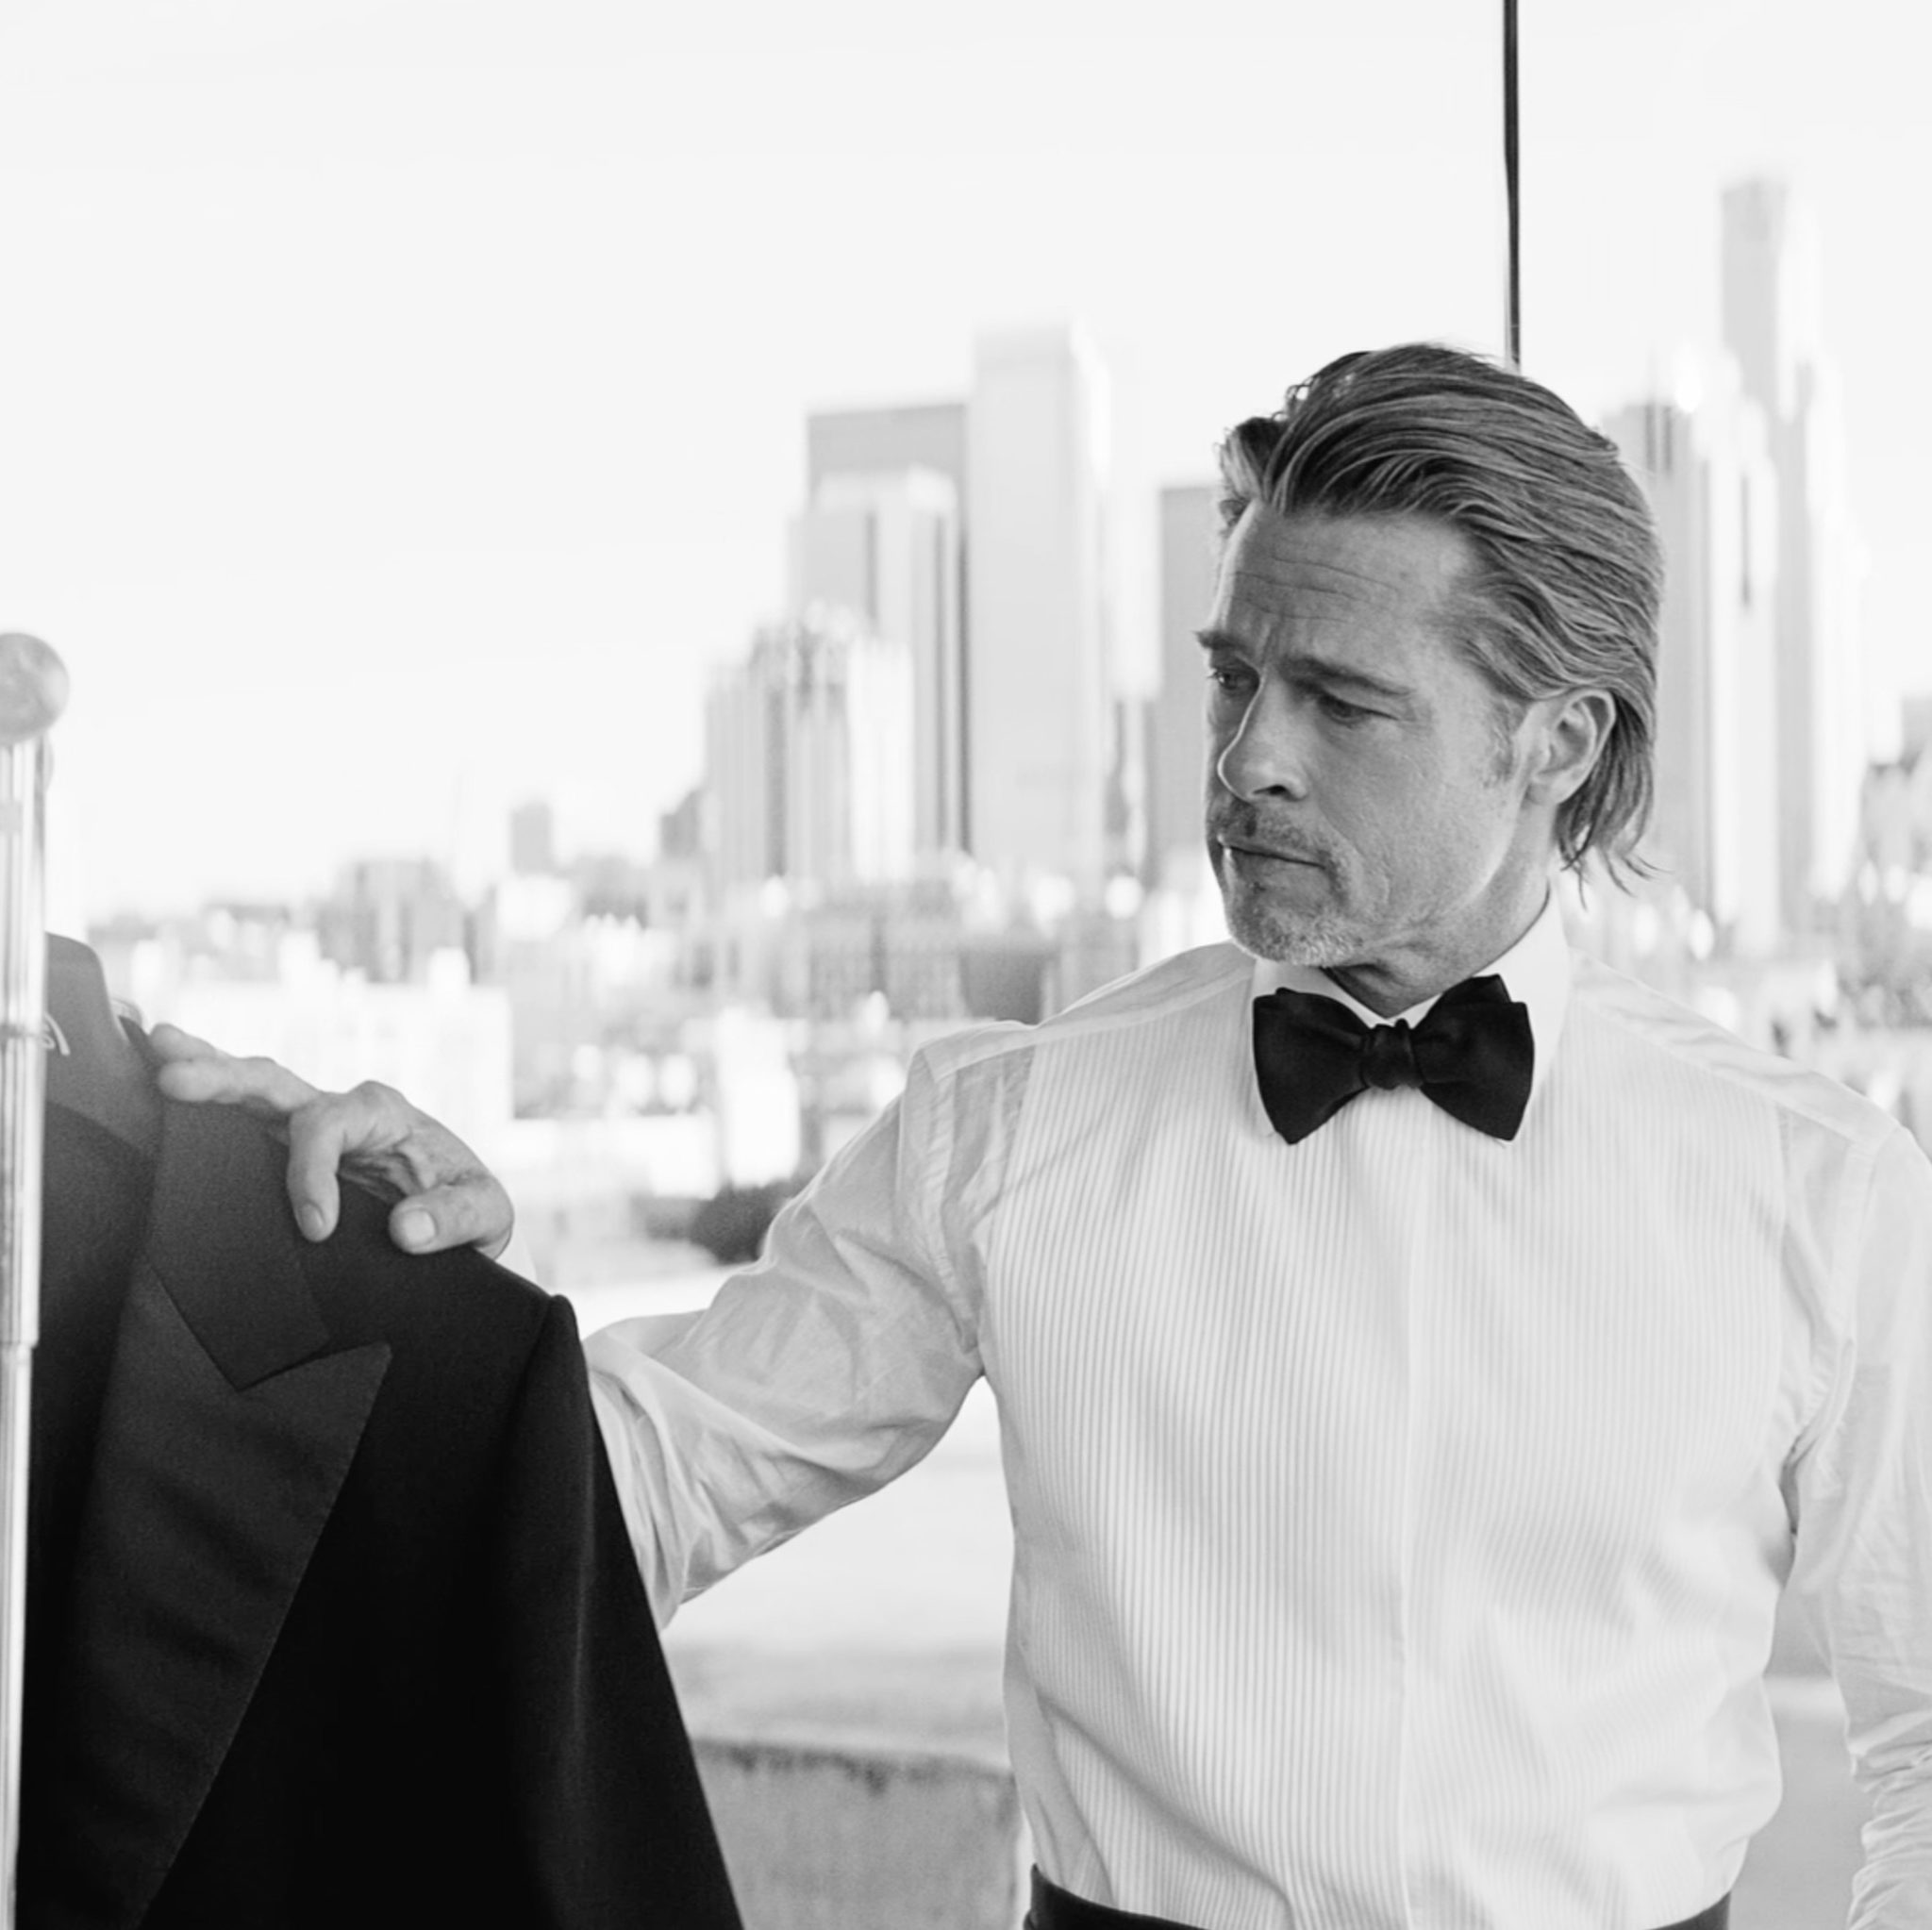 Brad Pitt and Brioni's New Collection Is Inspired by the Actor's